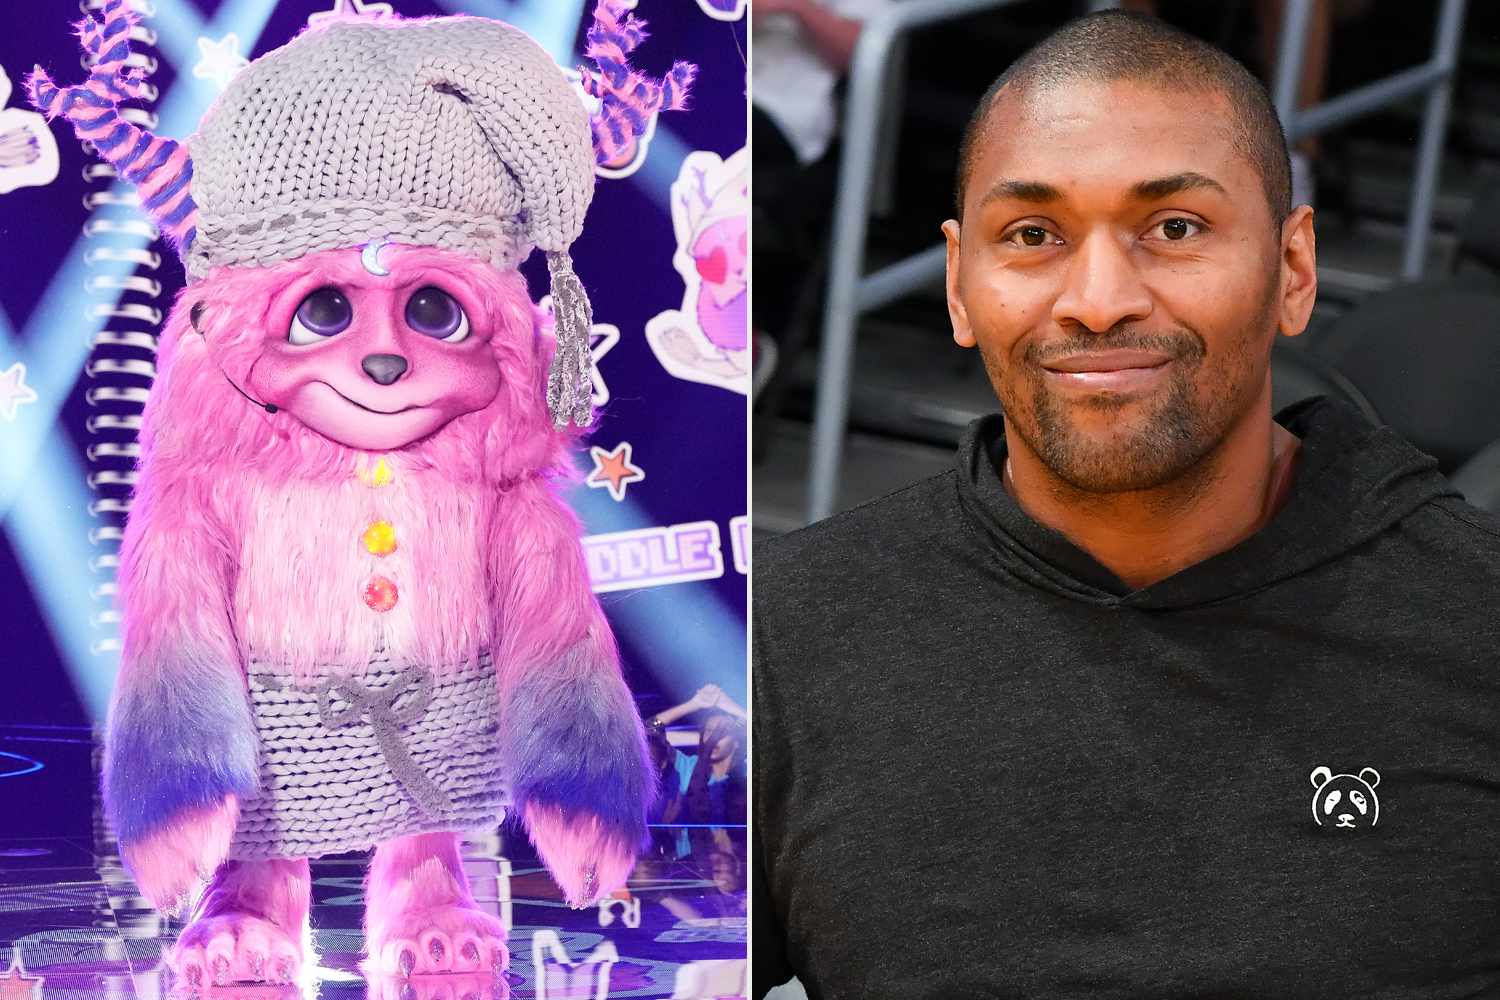 THE MASKED SINGER: Cuddle Monster, Metta World Peace